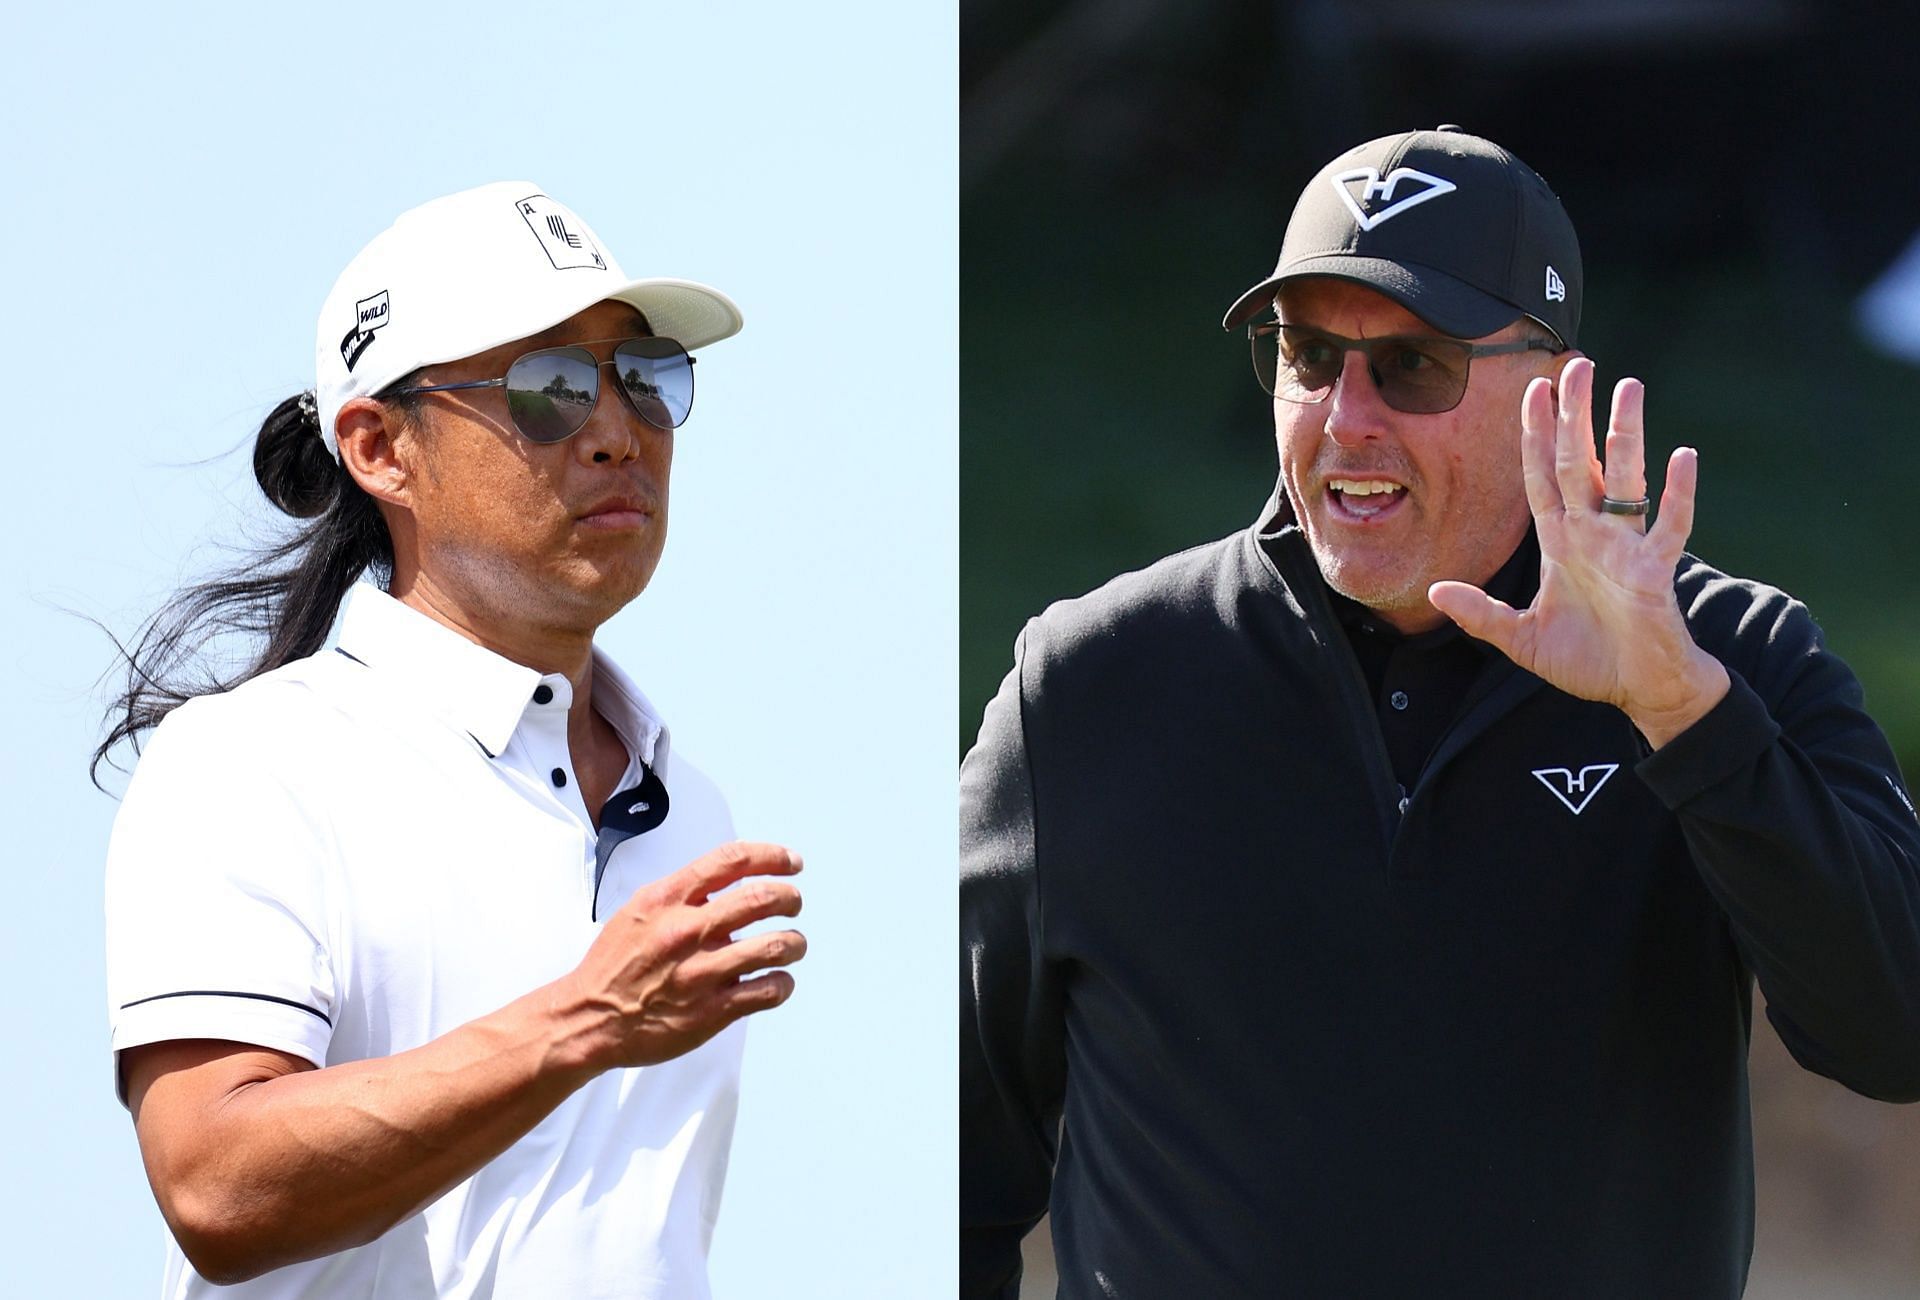 Anthony Kim and Phil Mickelson